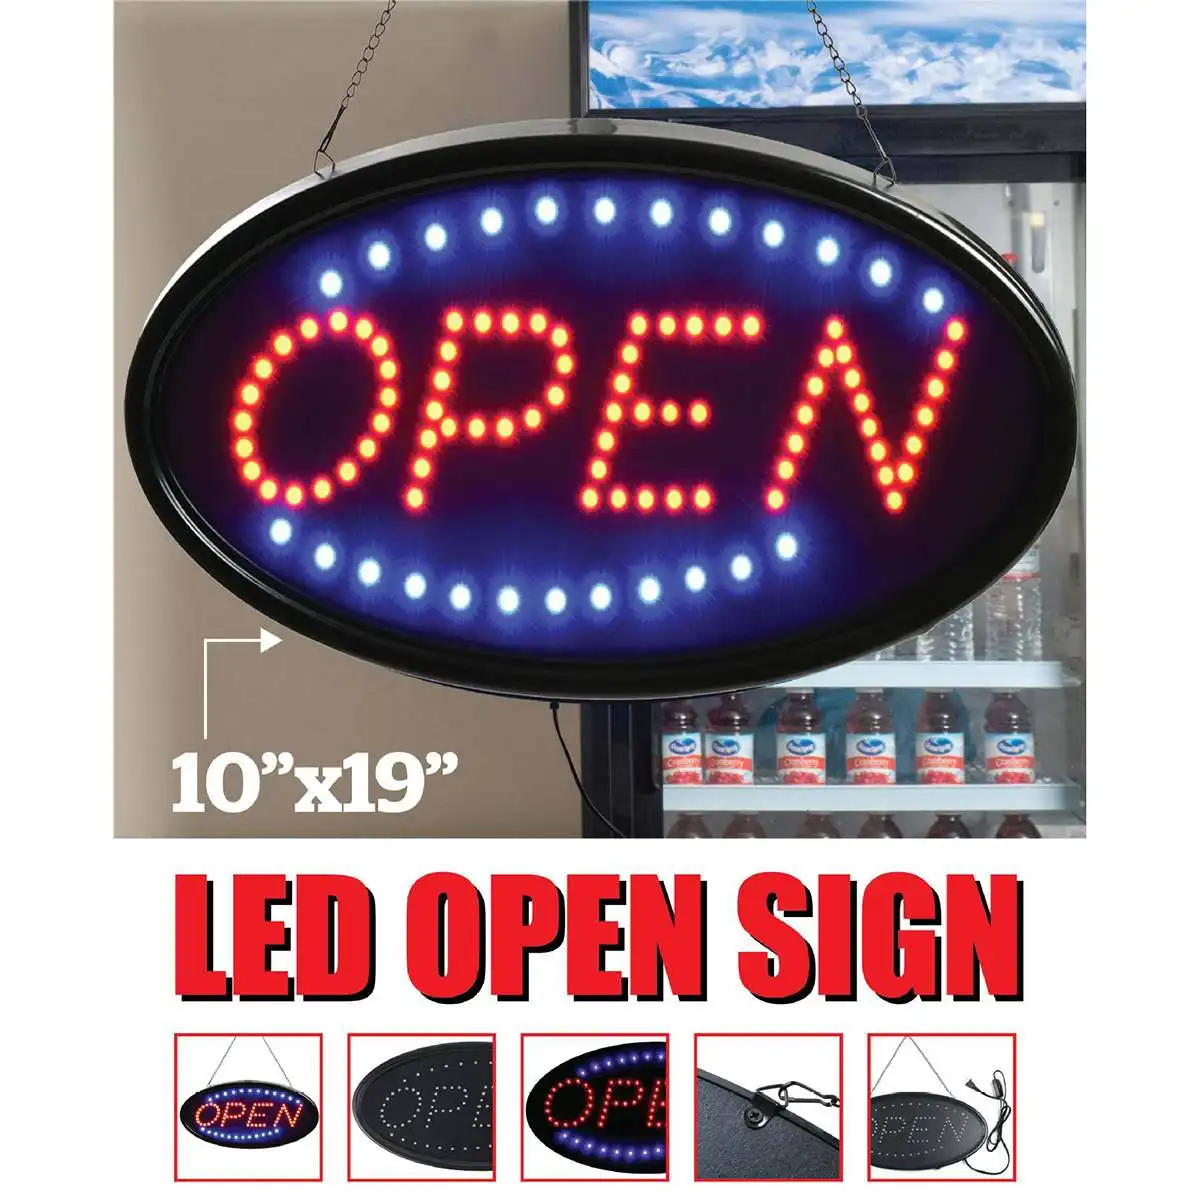 Details about   Neon Light Sign Billboard Hangable High Quality Advertising Bar Bookstore Shop 